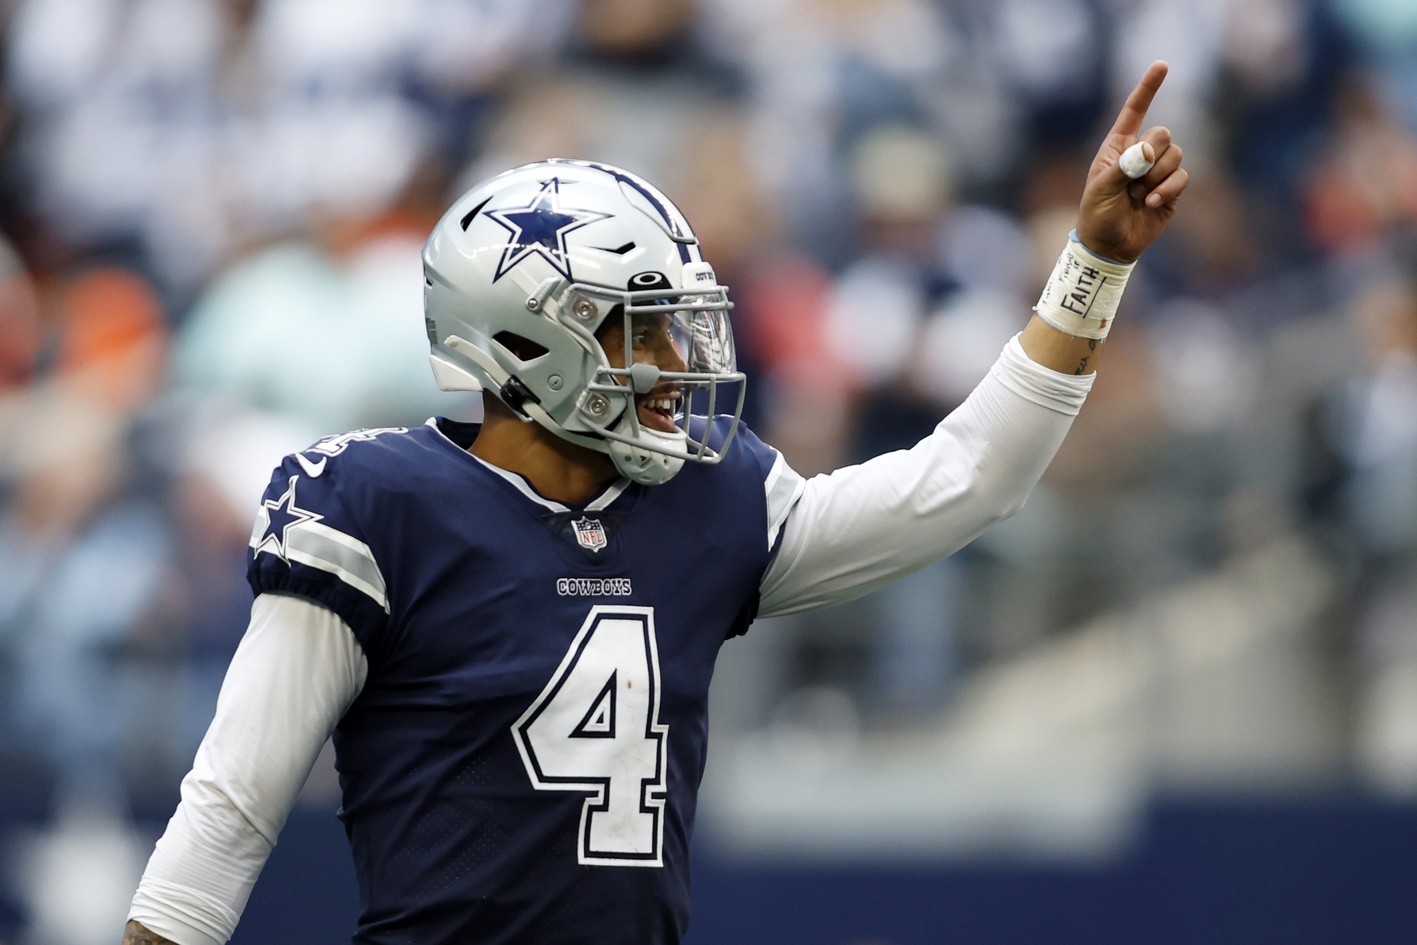 Indianapolis Colts vs. Dallas Cowboys betting odds for NFL Week 13